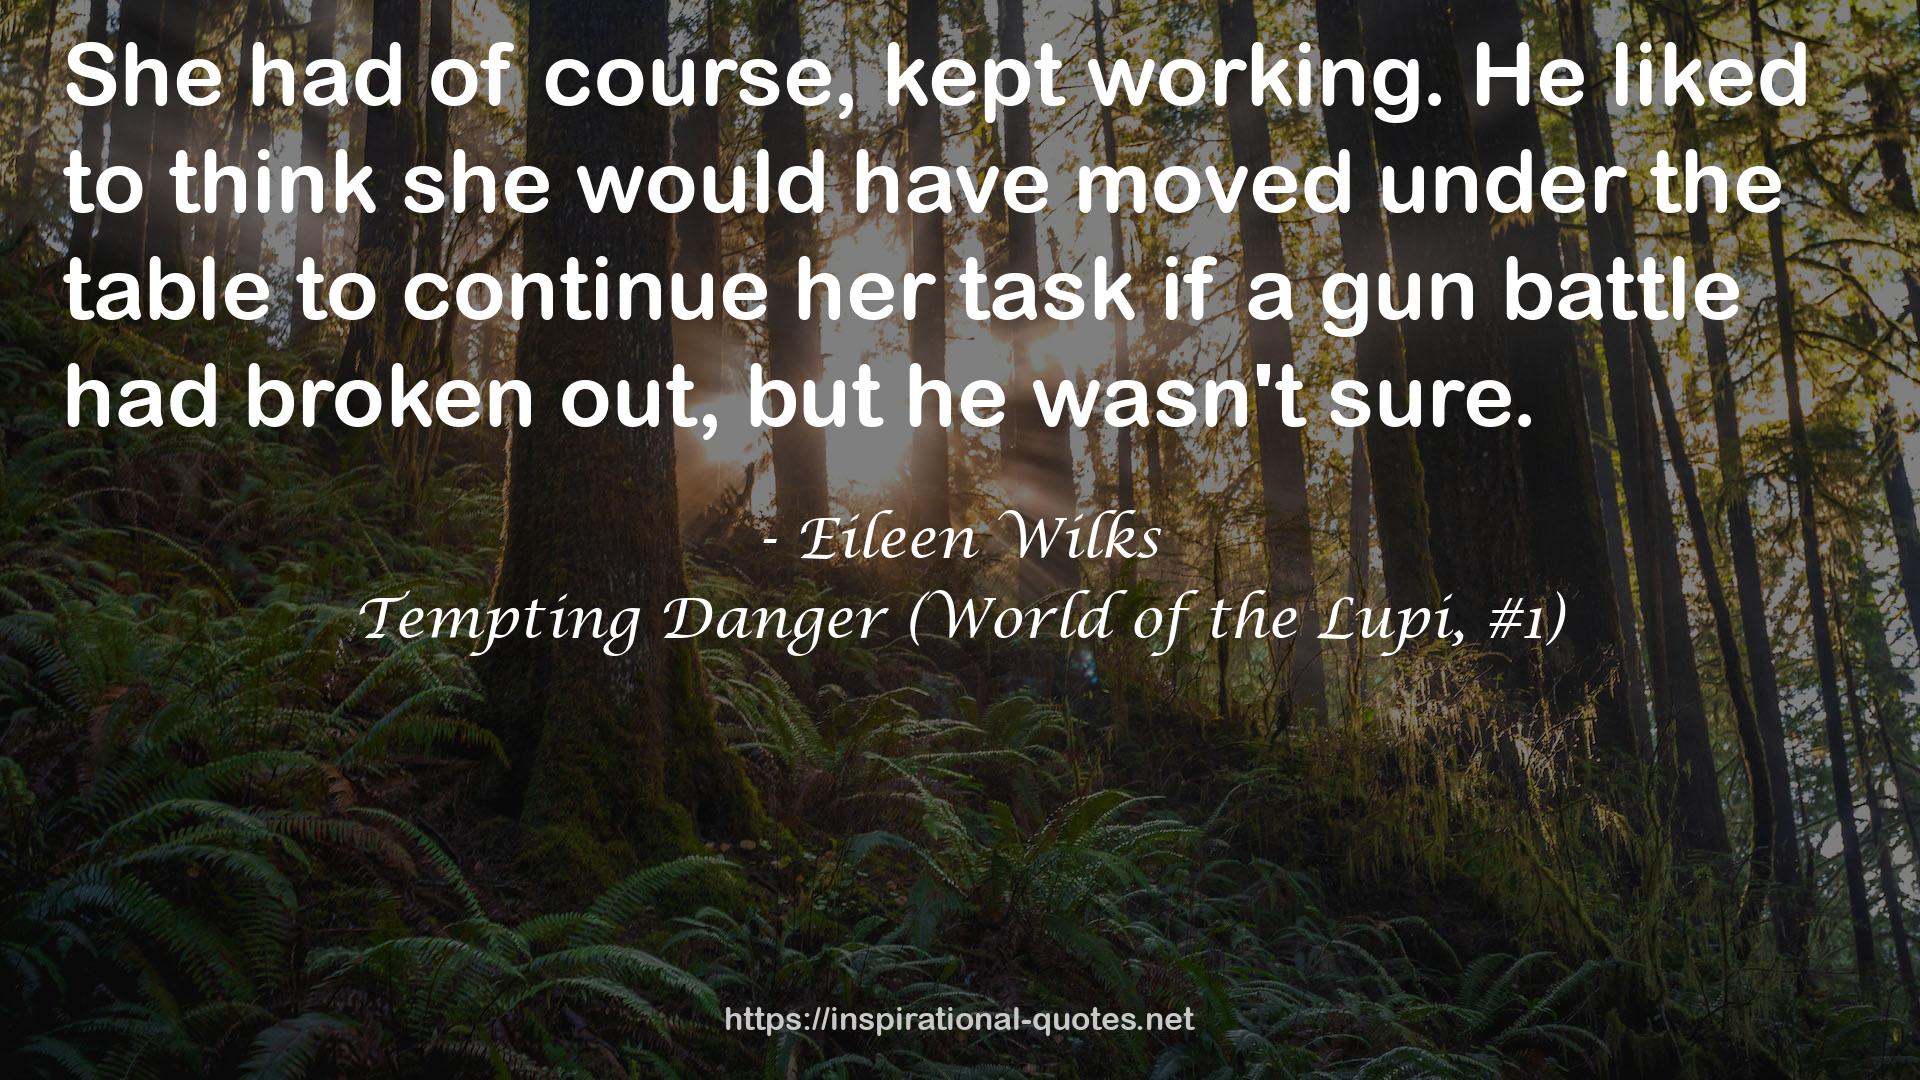 Tempting Danger (World of the Lupi, #1) QUOTES